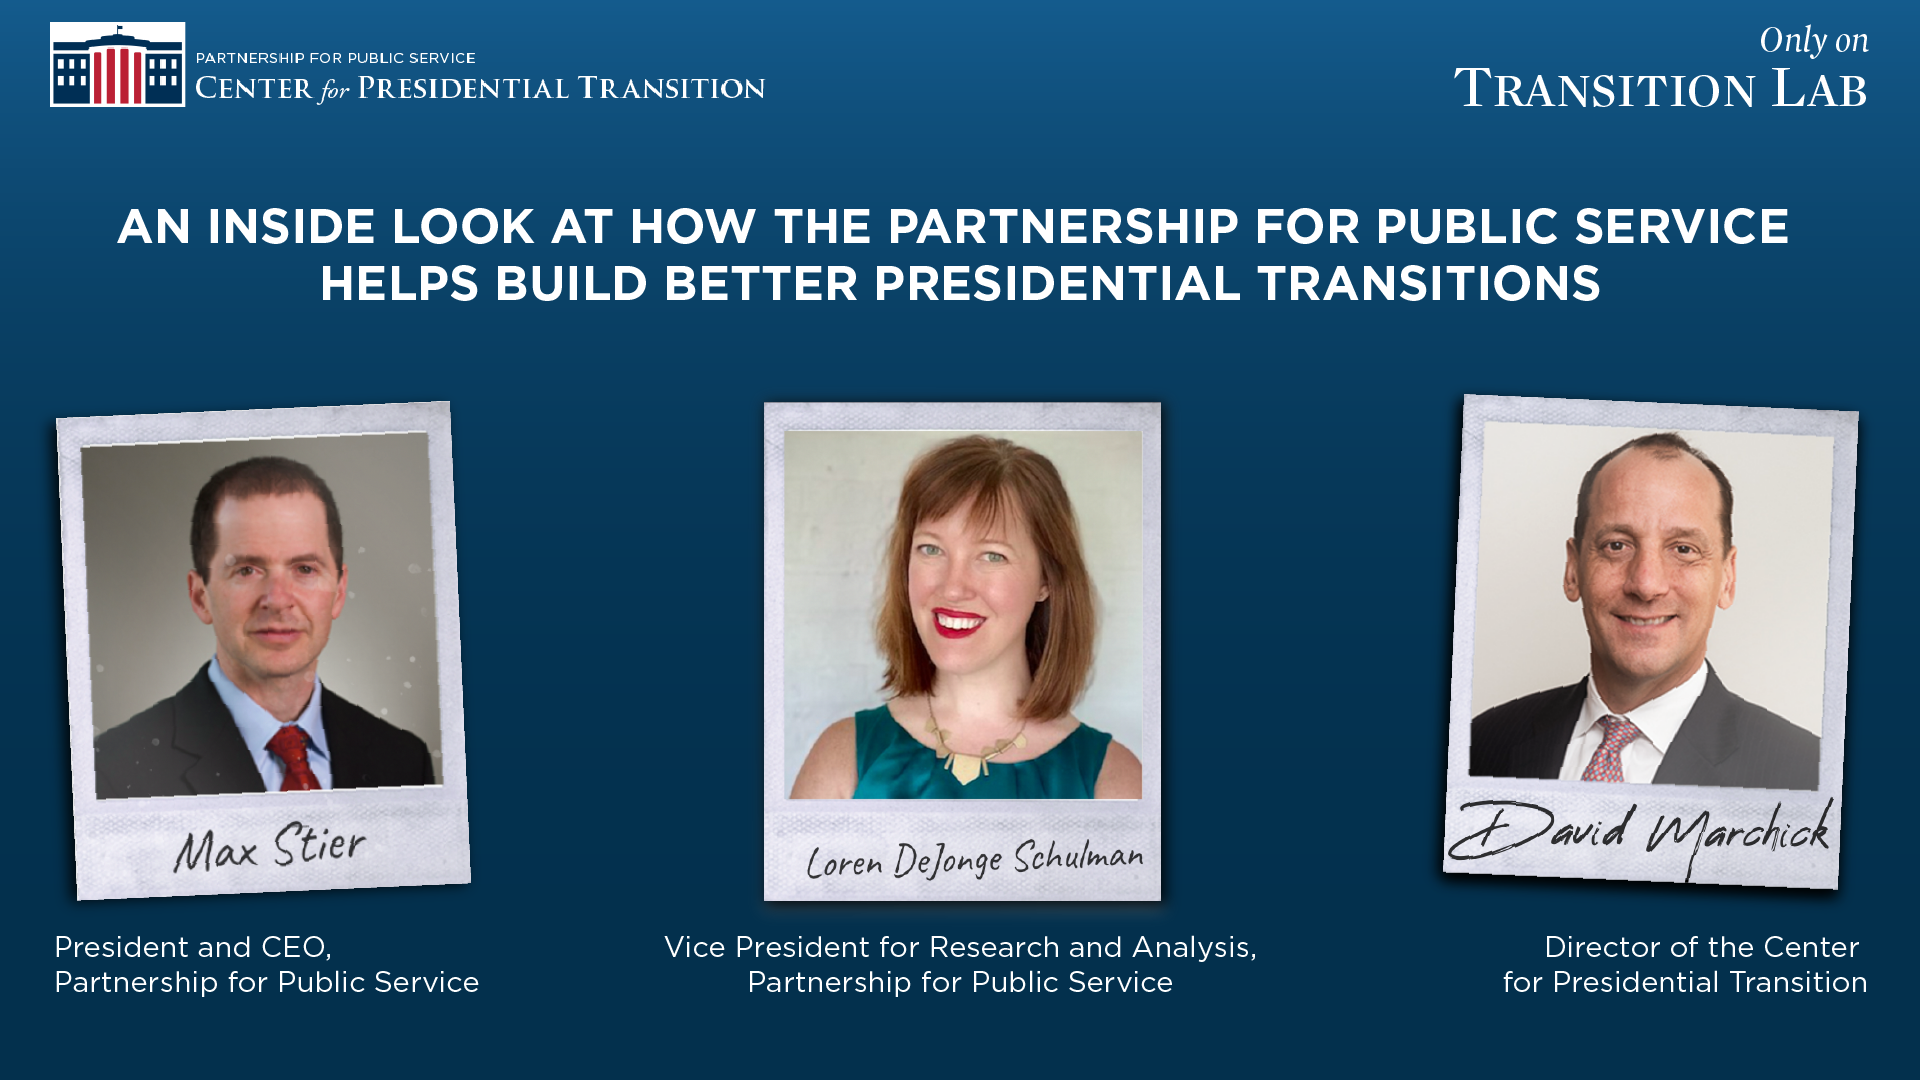 An Inside Look at How the Partnership for Public Service Helps Build